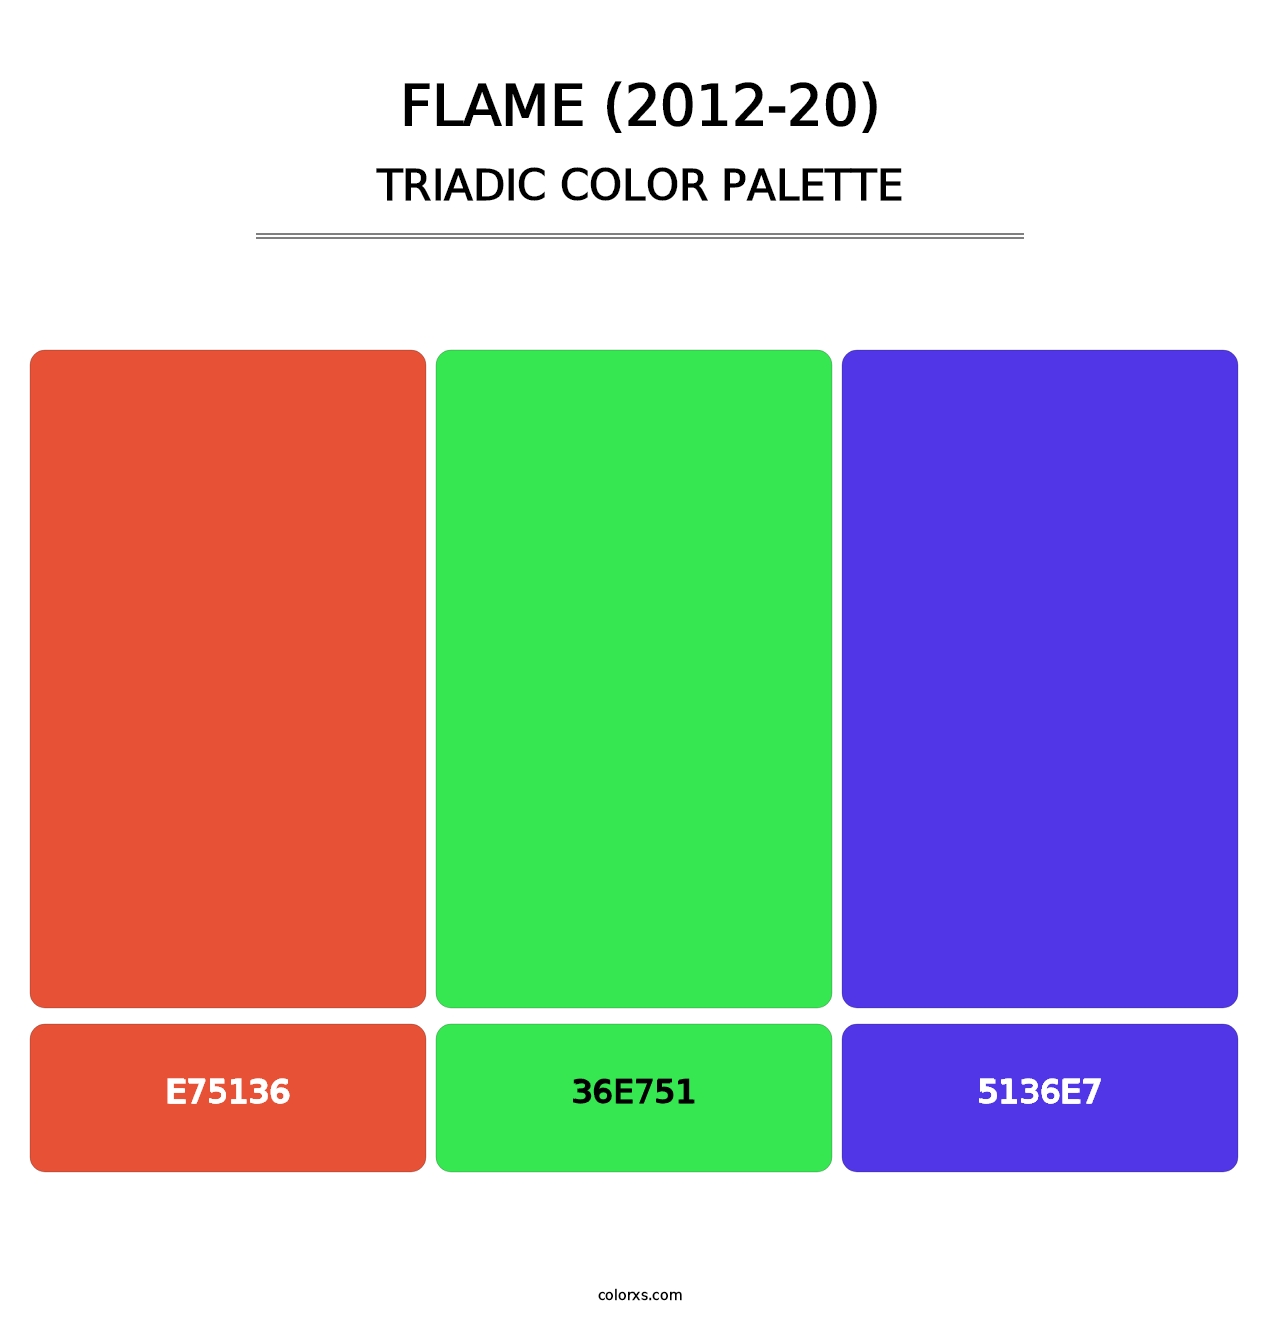 Flame (2012-20) - Triadic Color Palette